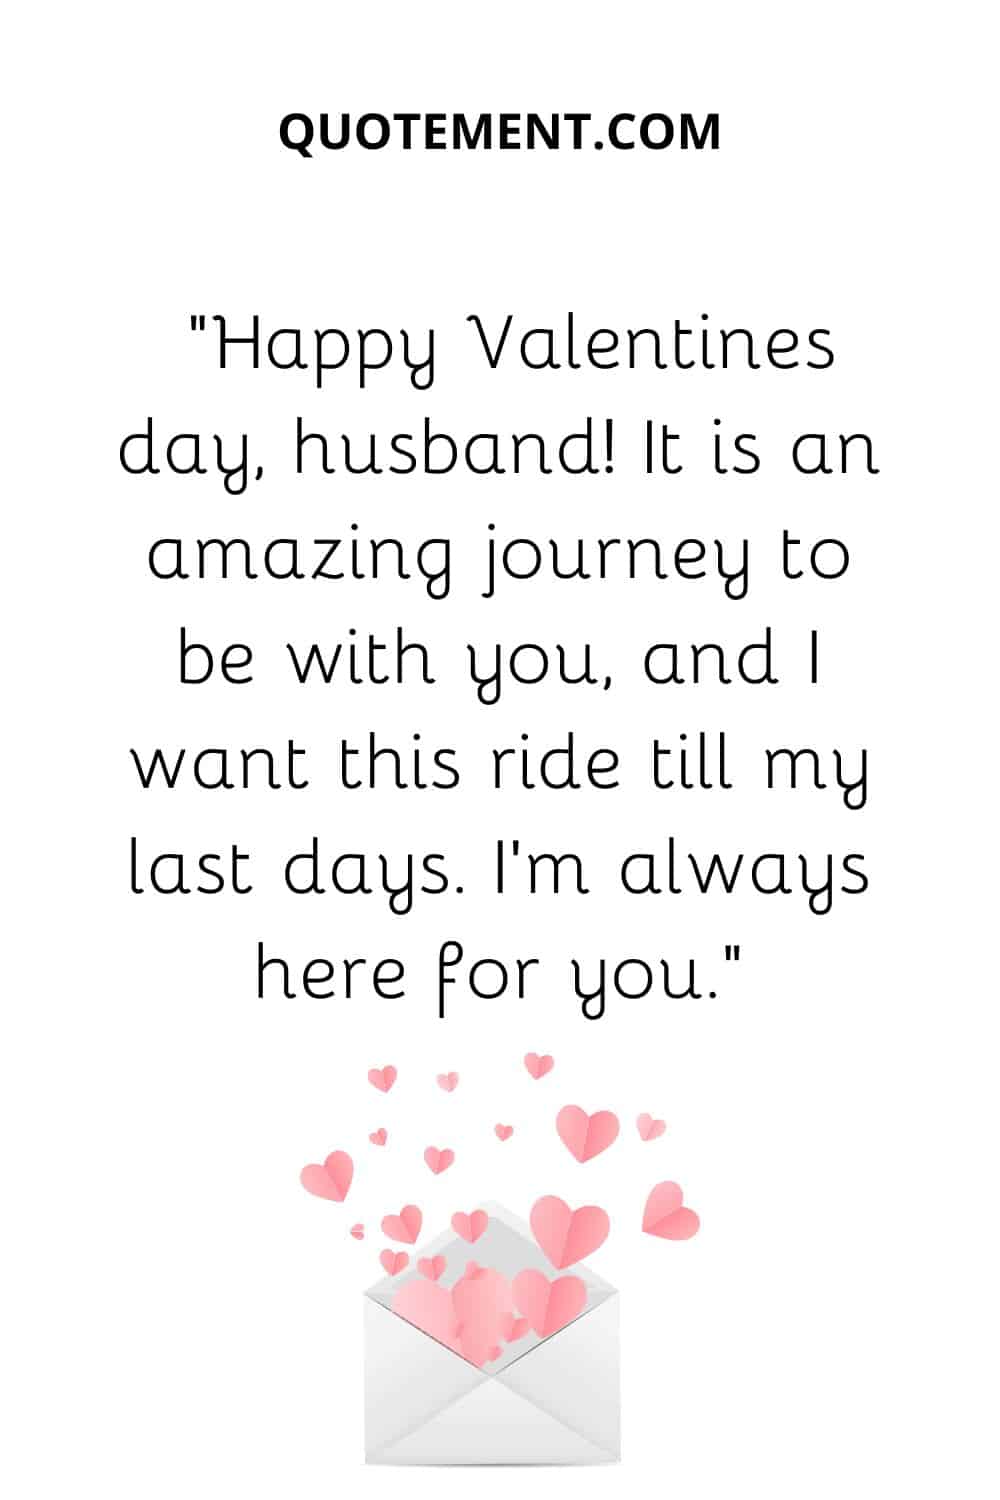 “Happy valentines day husband! It is an amazing journey to be with you, and I want this ride till my last days. I’m always here for you.”